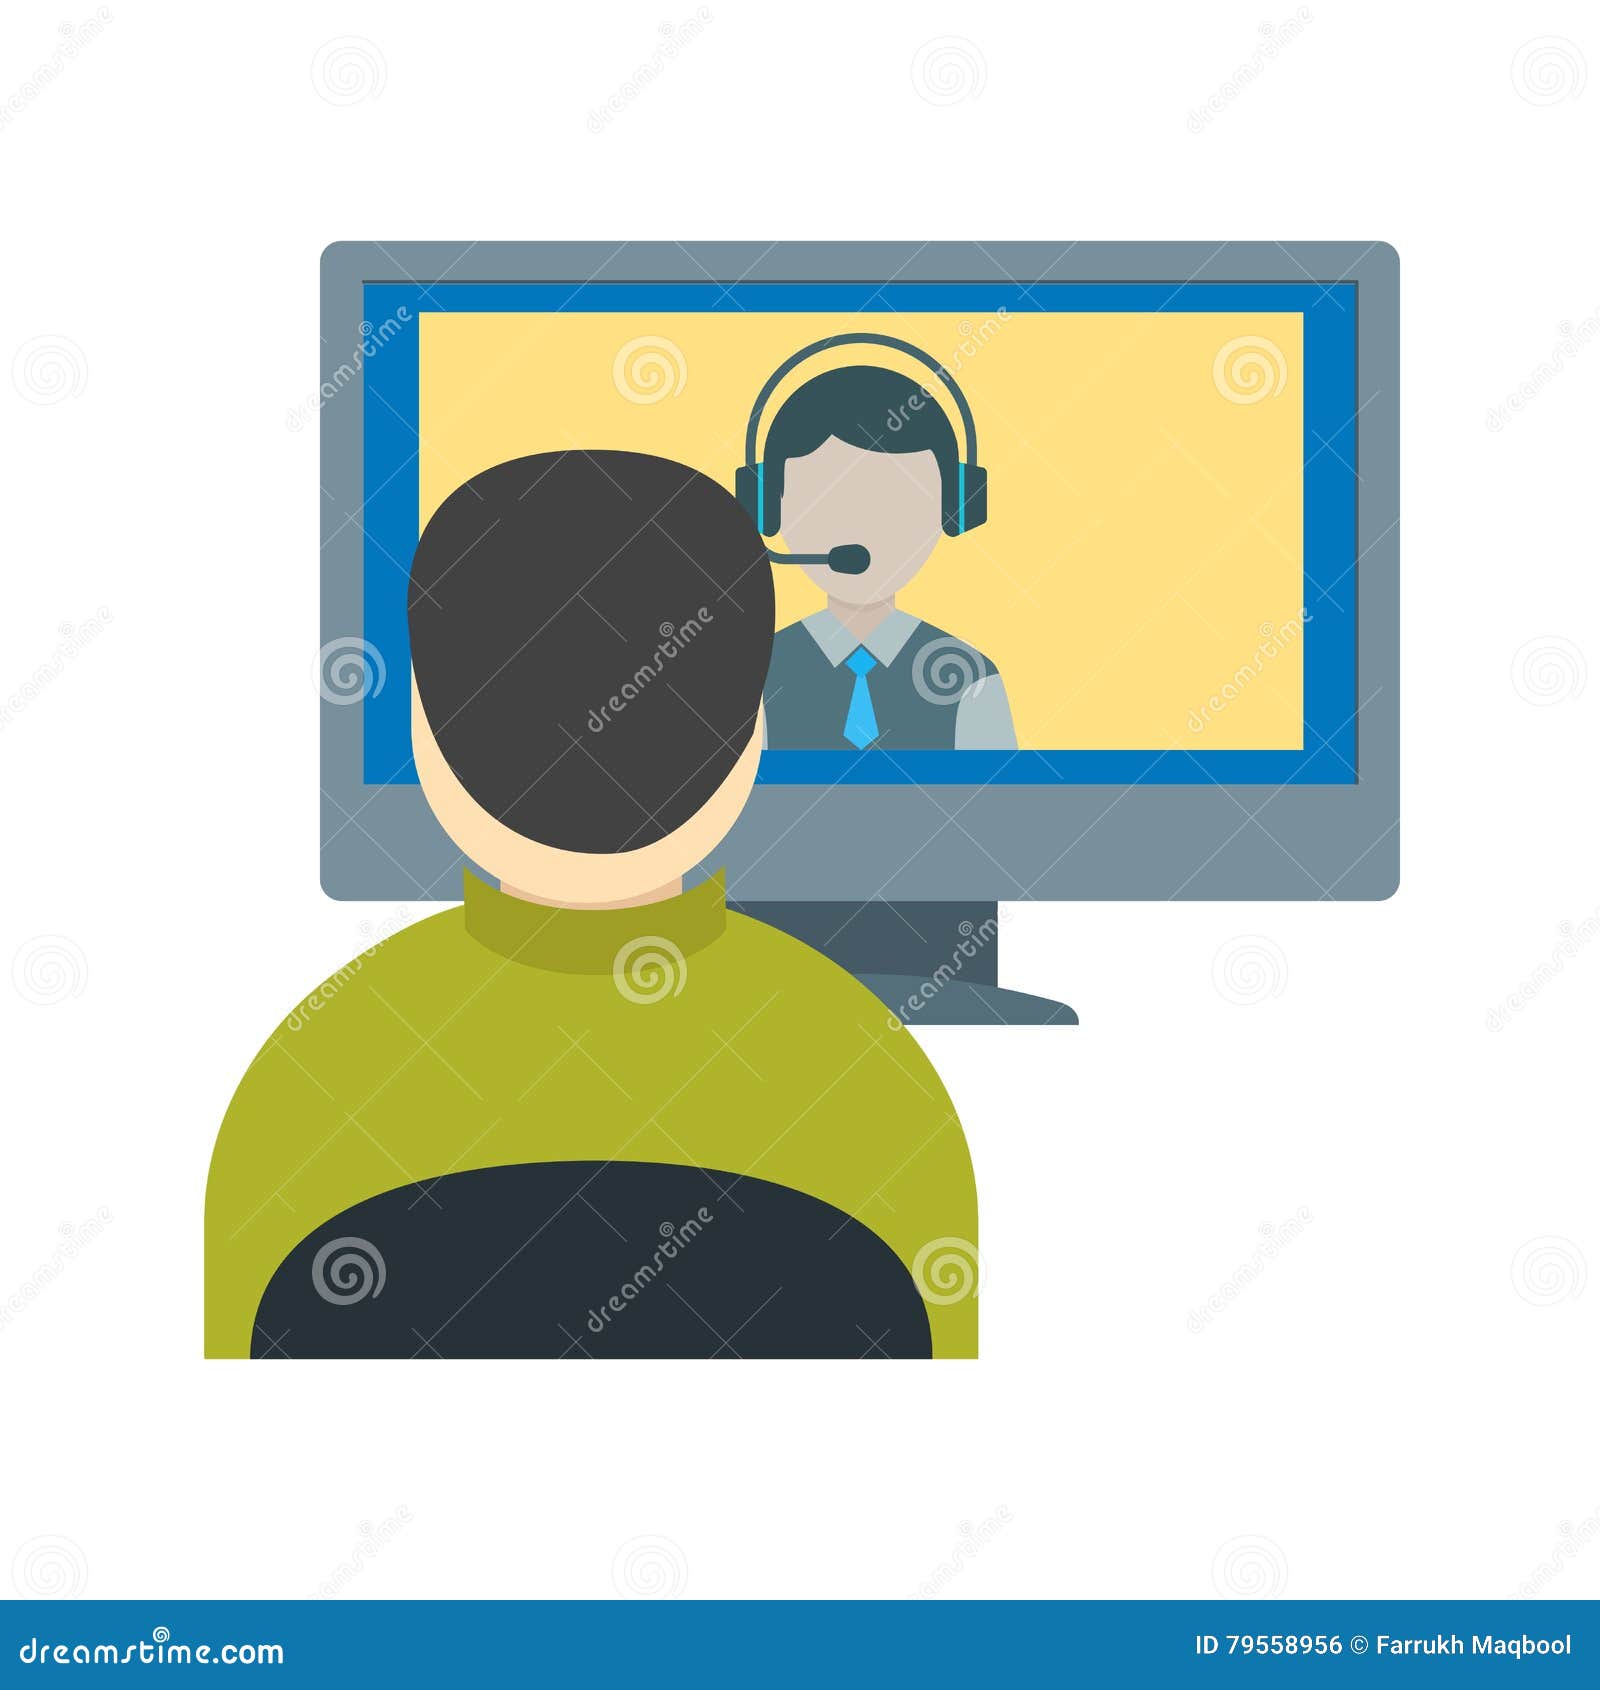 Conference Call stock vector. Illustration of communication - 79558956